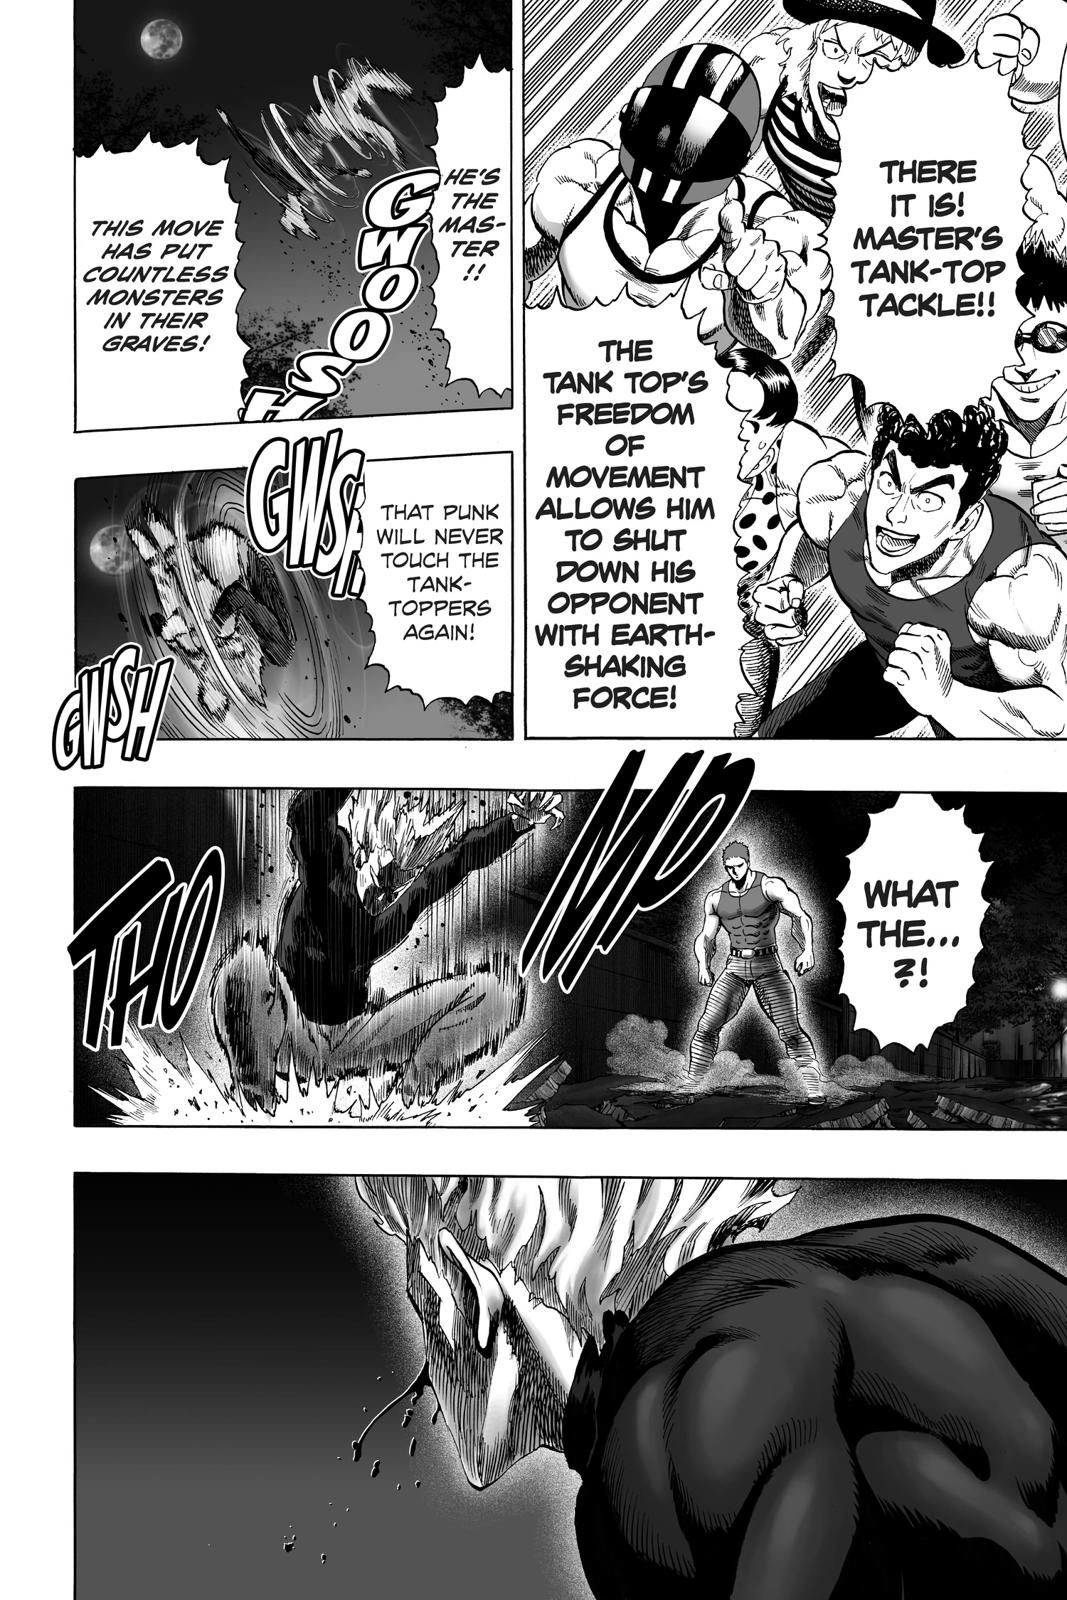 One-Punch Man, Punch 46 image 17